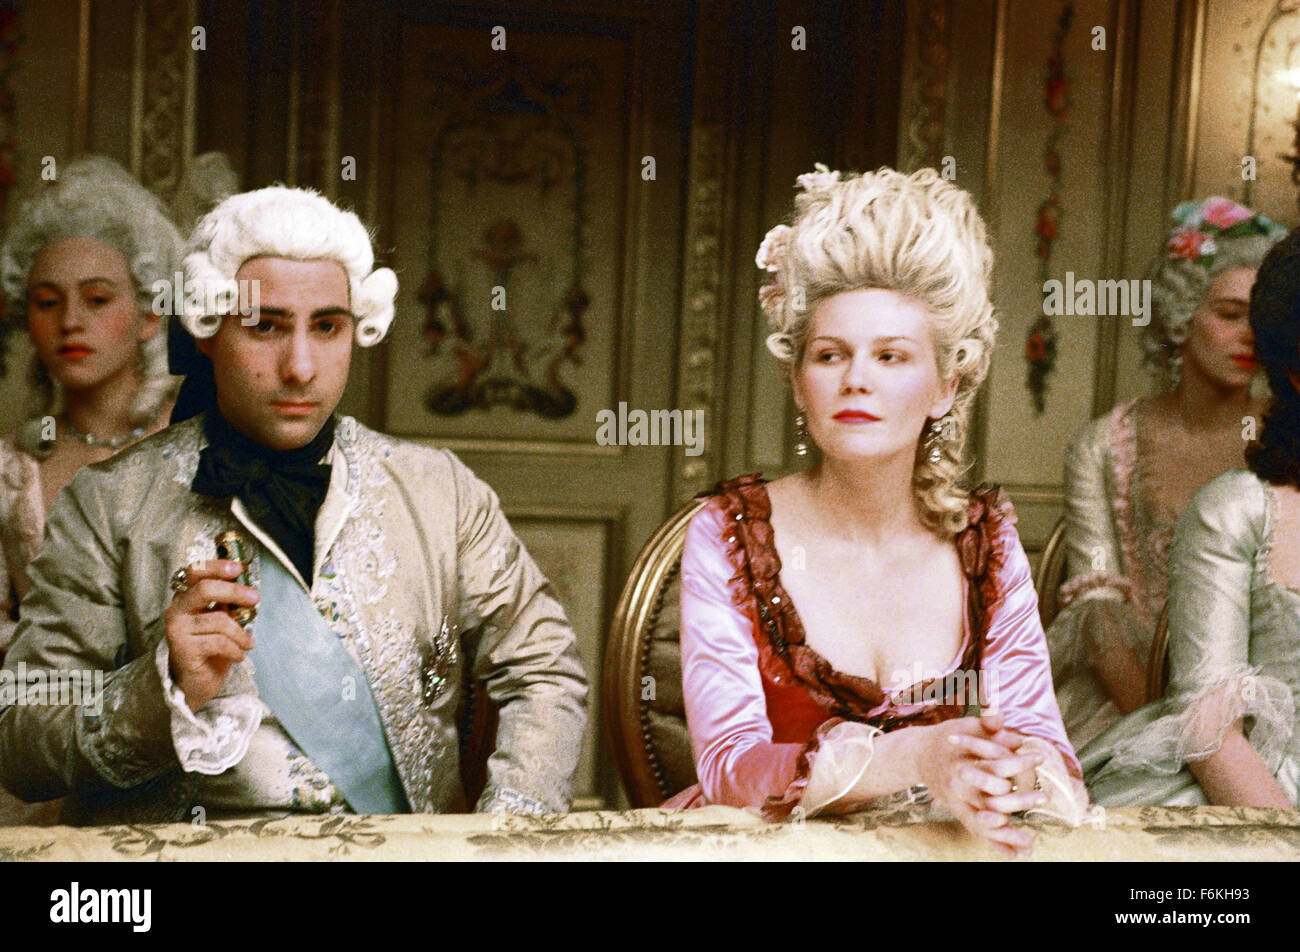 RELEASE DATE: October 20, 2006. MOVIE TITLE: Marie Antoinette Stock Photo: 90170447 - Alamy